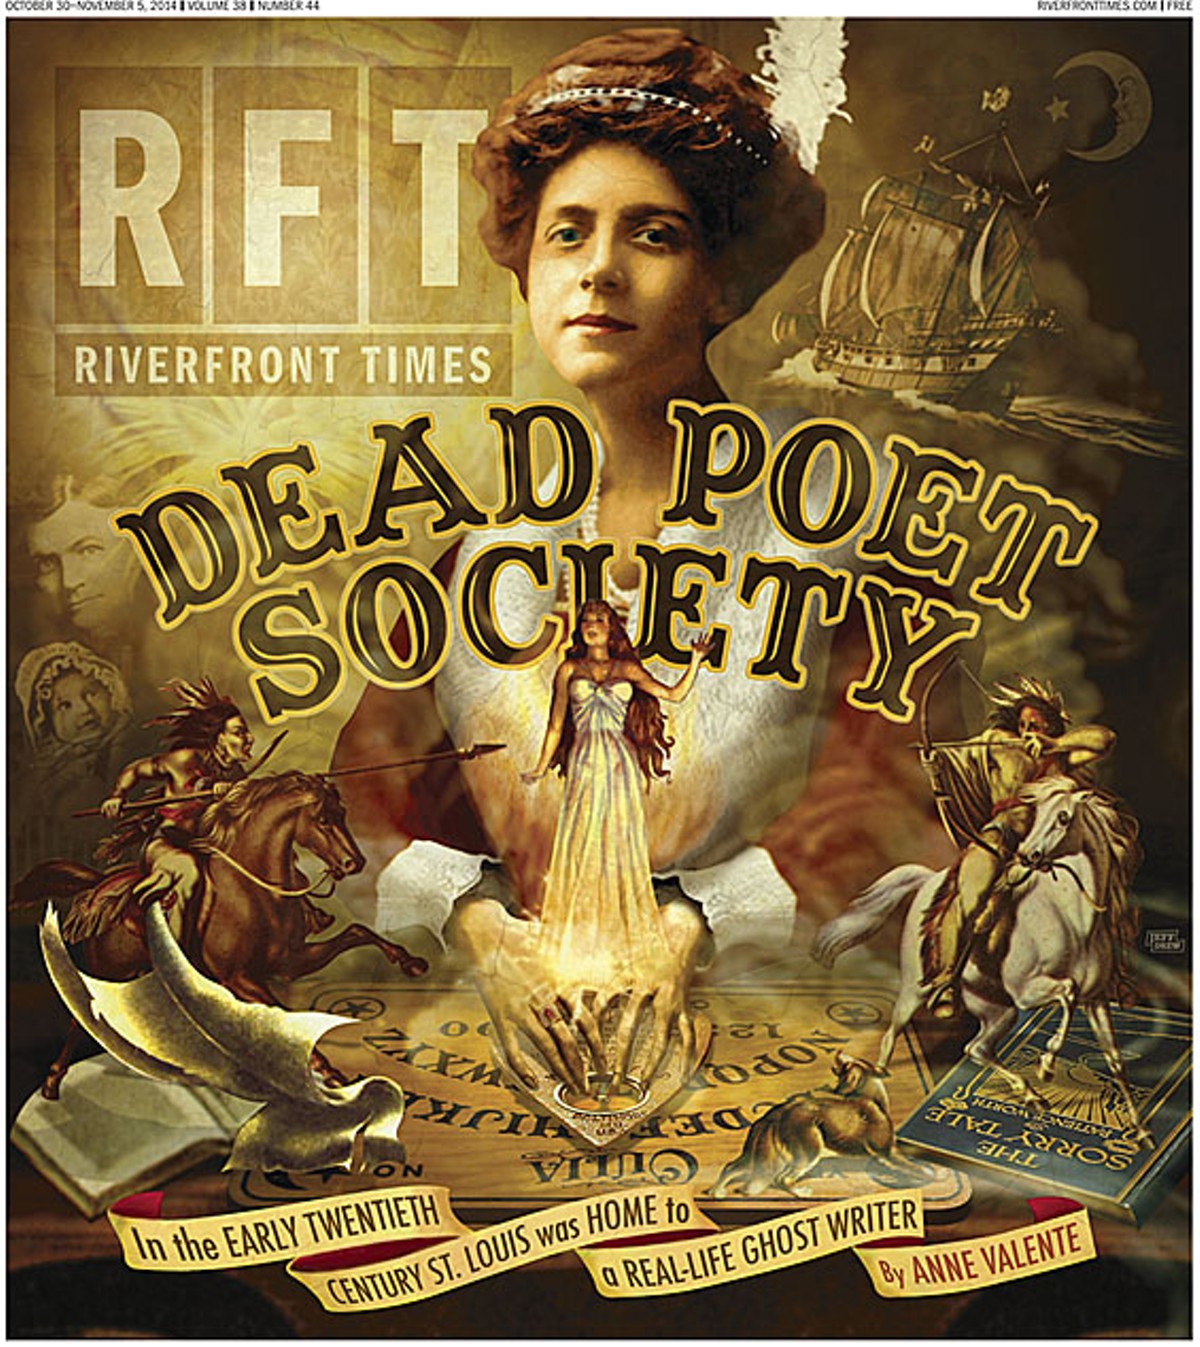 The Cover of the October 30 Print Edition